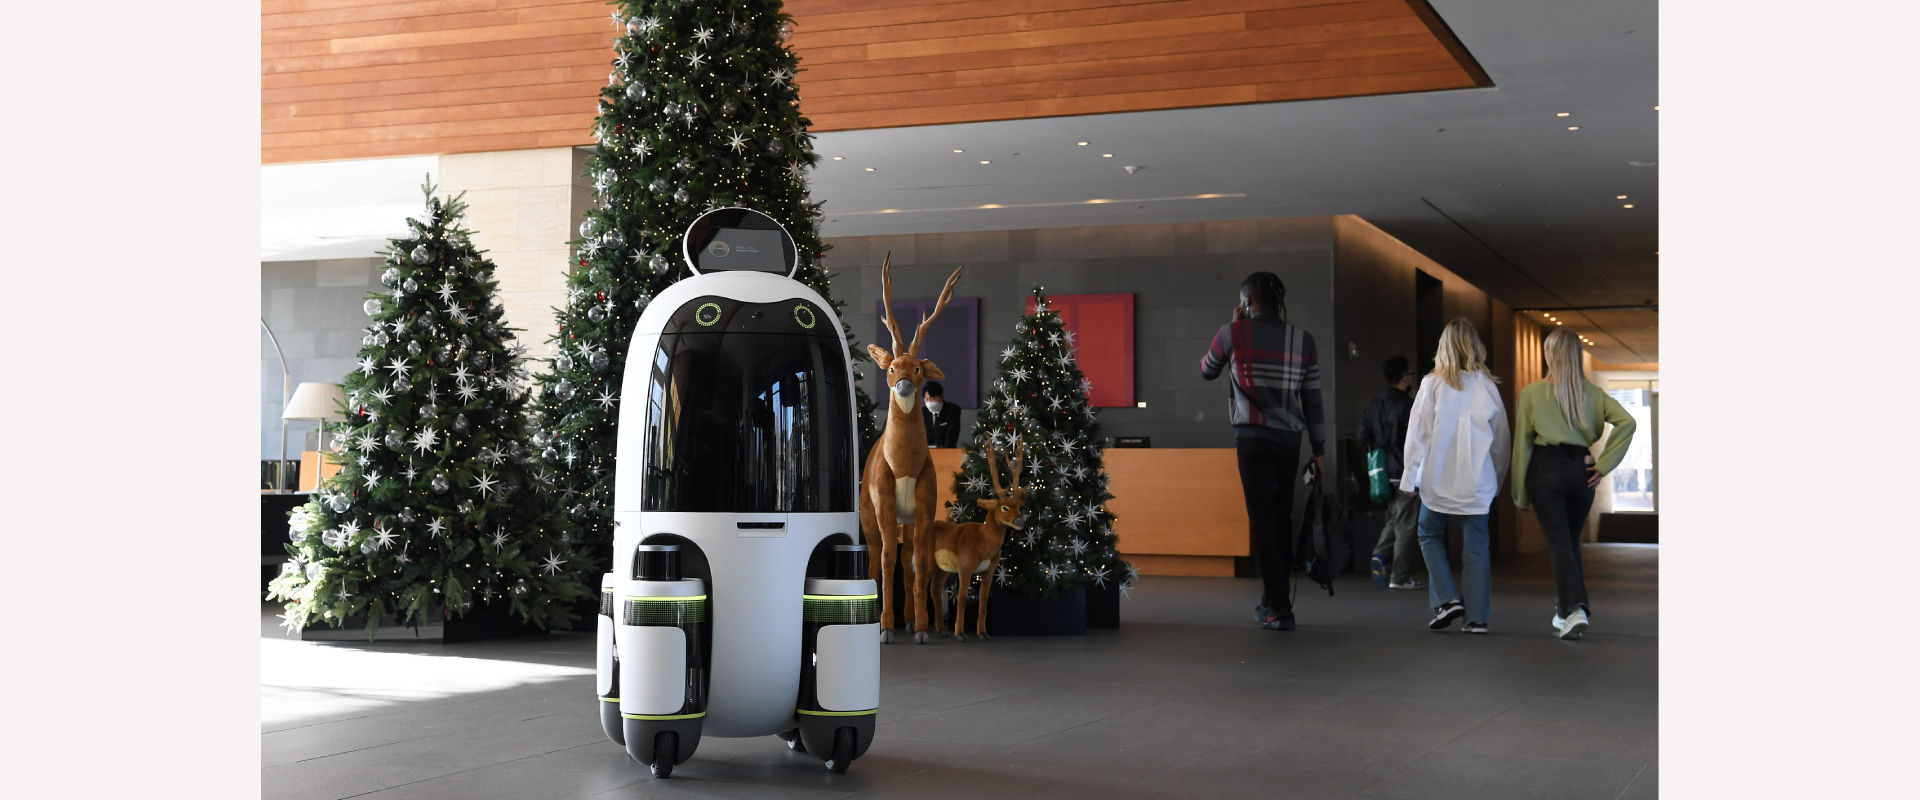 Hyundai Motor Group Robots Get Rolling with  Pilot Programs to Advance Last-mile Delivery